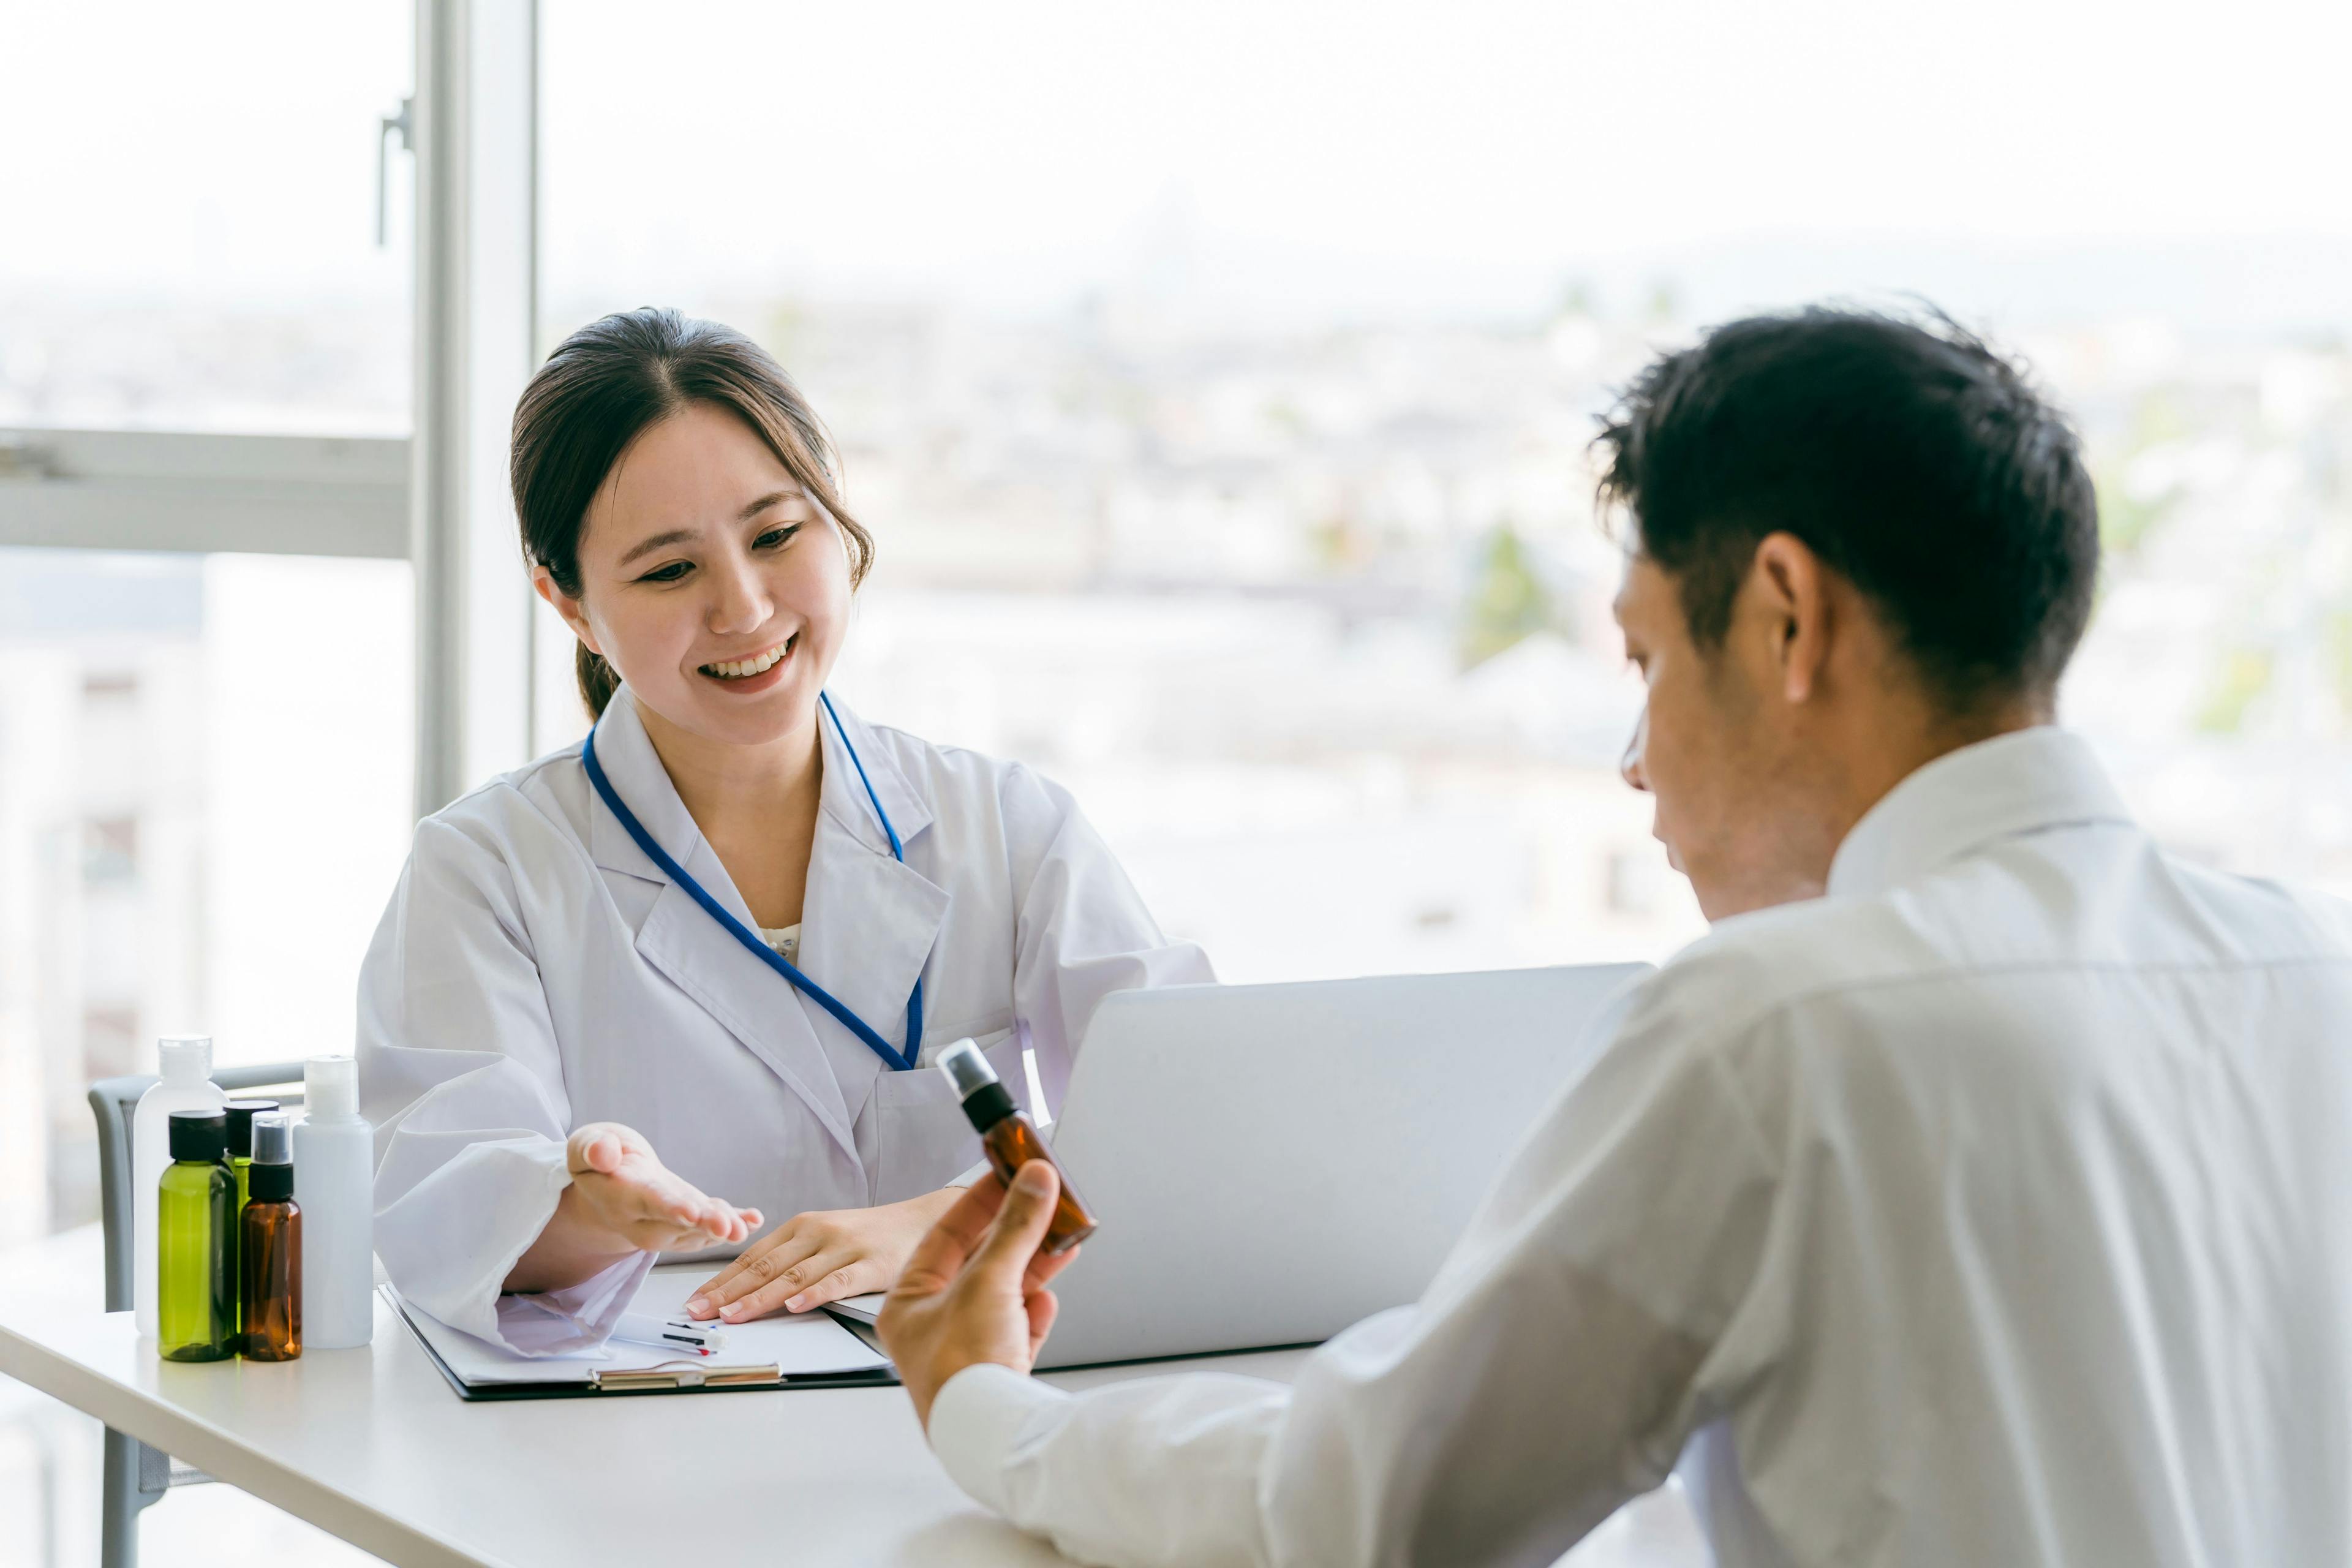 Patient meeting with physician | Image credit: buritora - stock.adobe.com